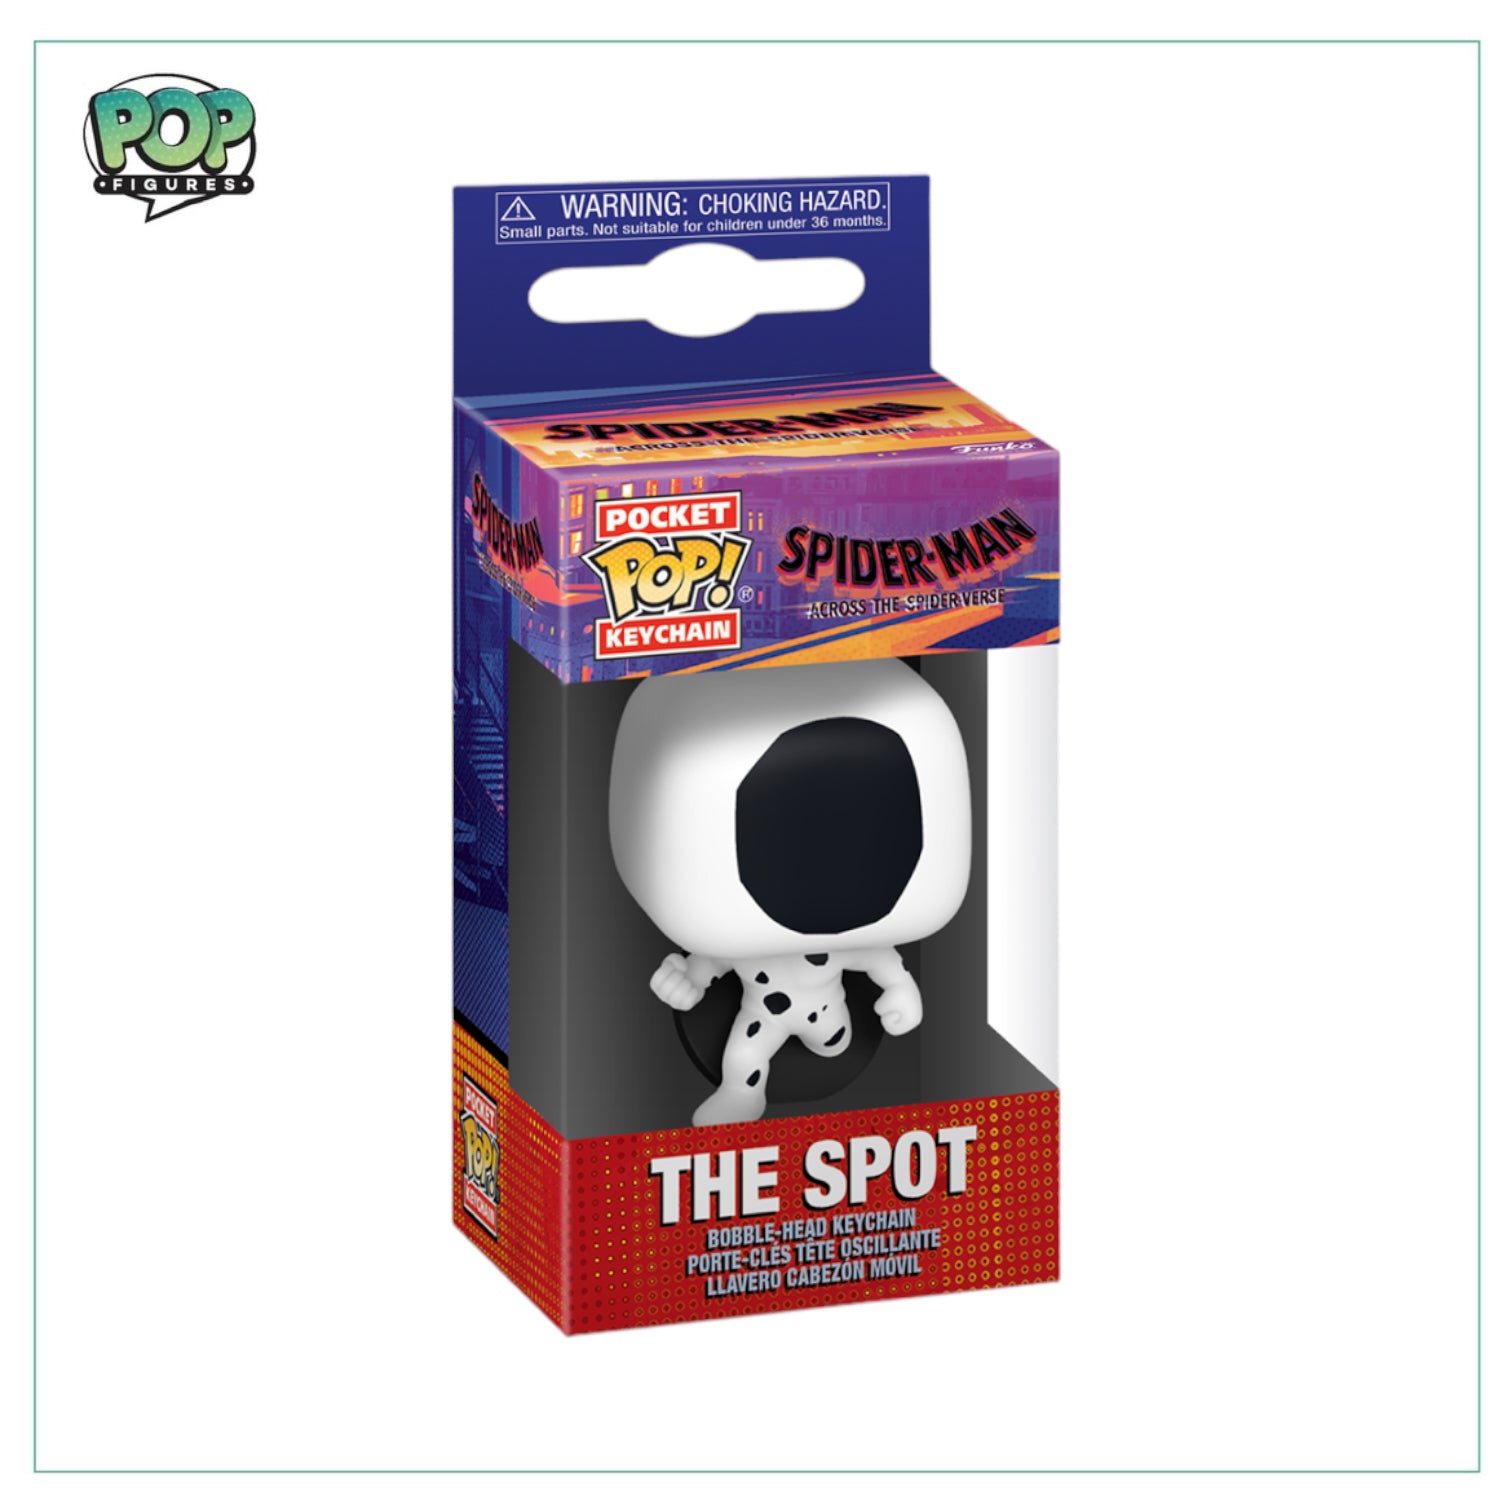 The Spot Funko Pocket Pop! Keychain Spider-Man Across the Spiderverse